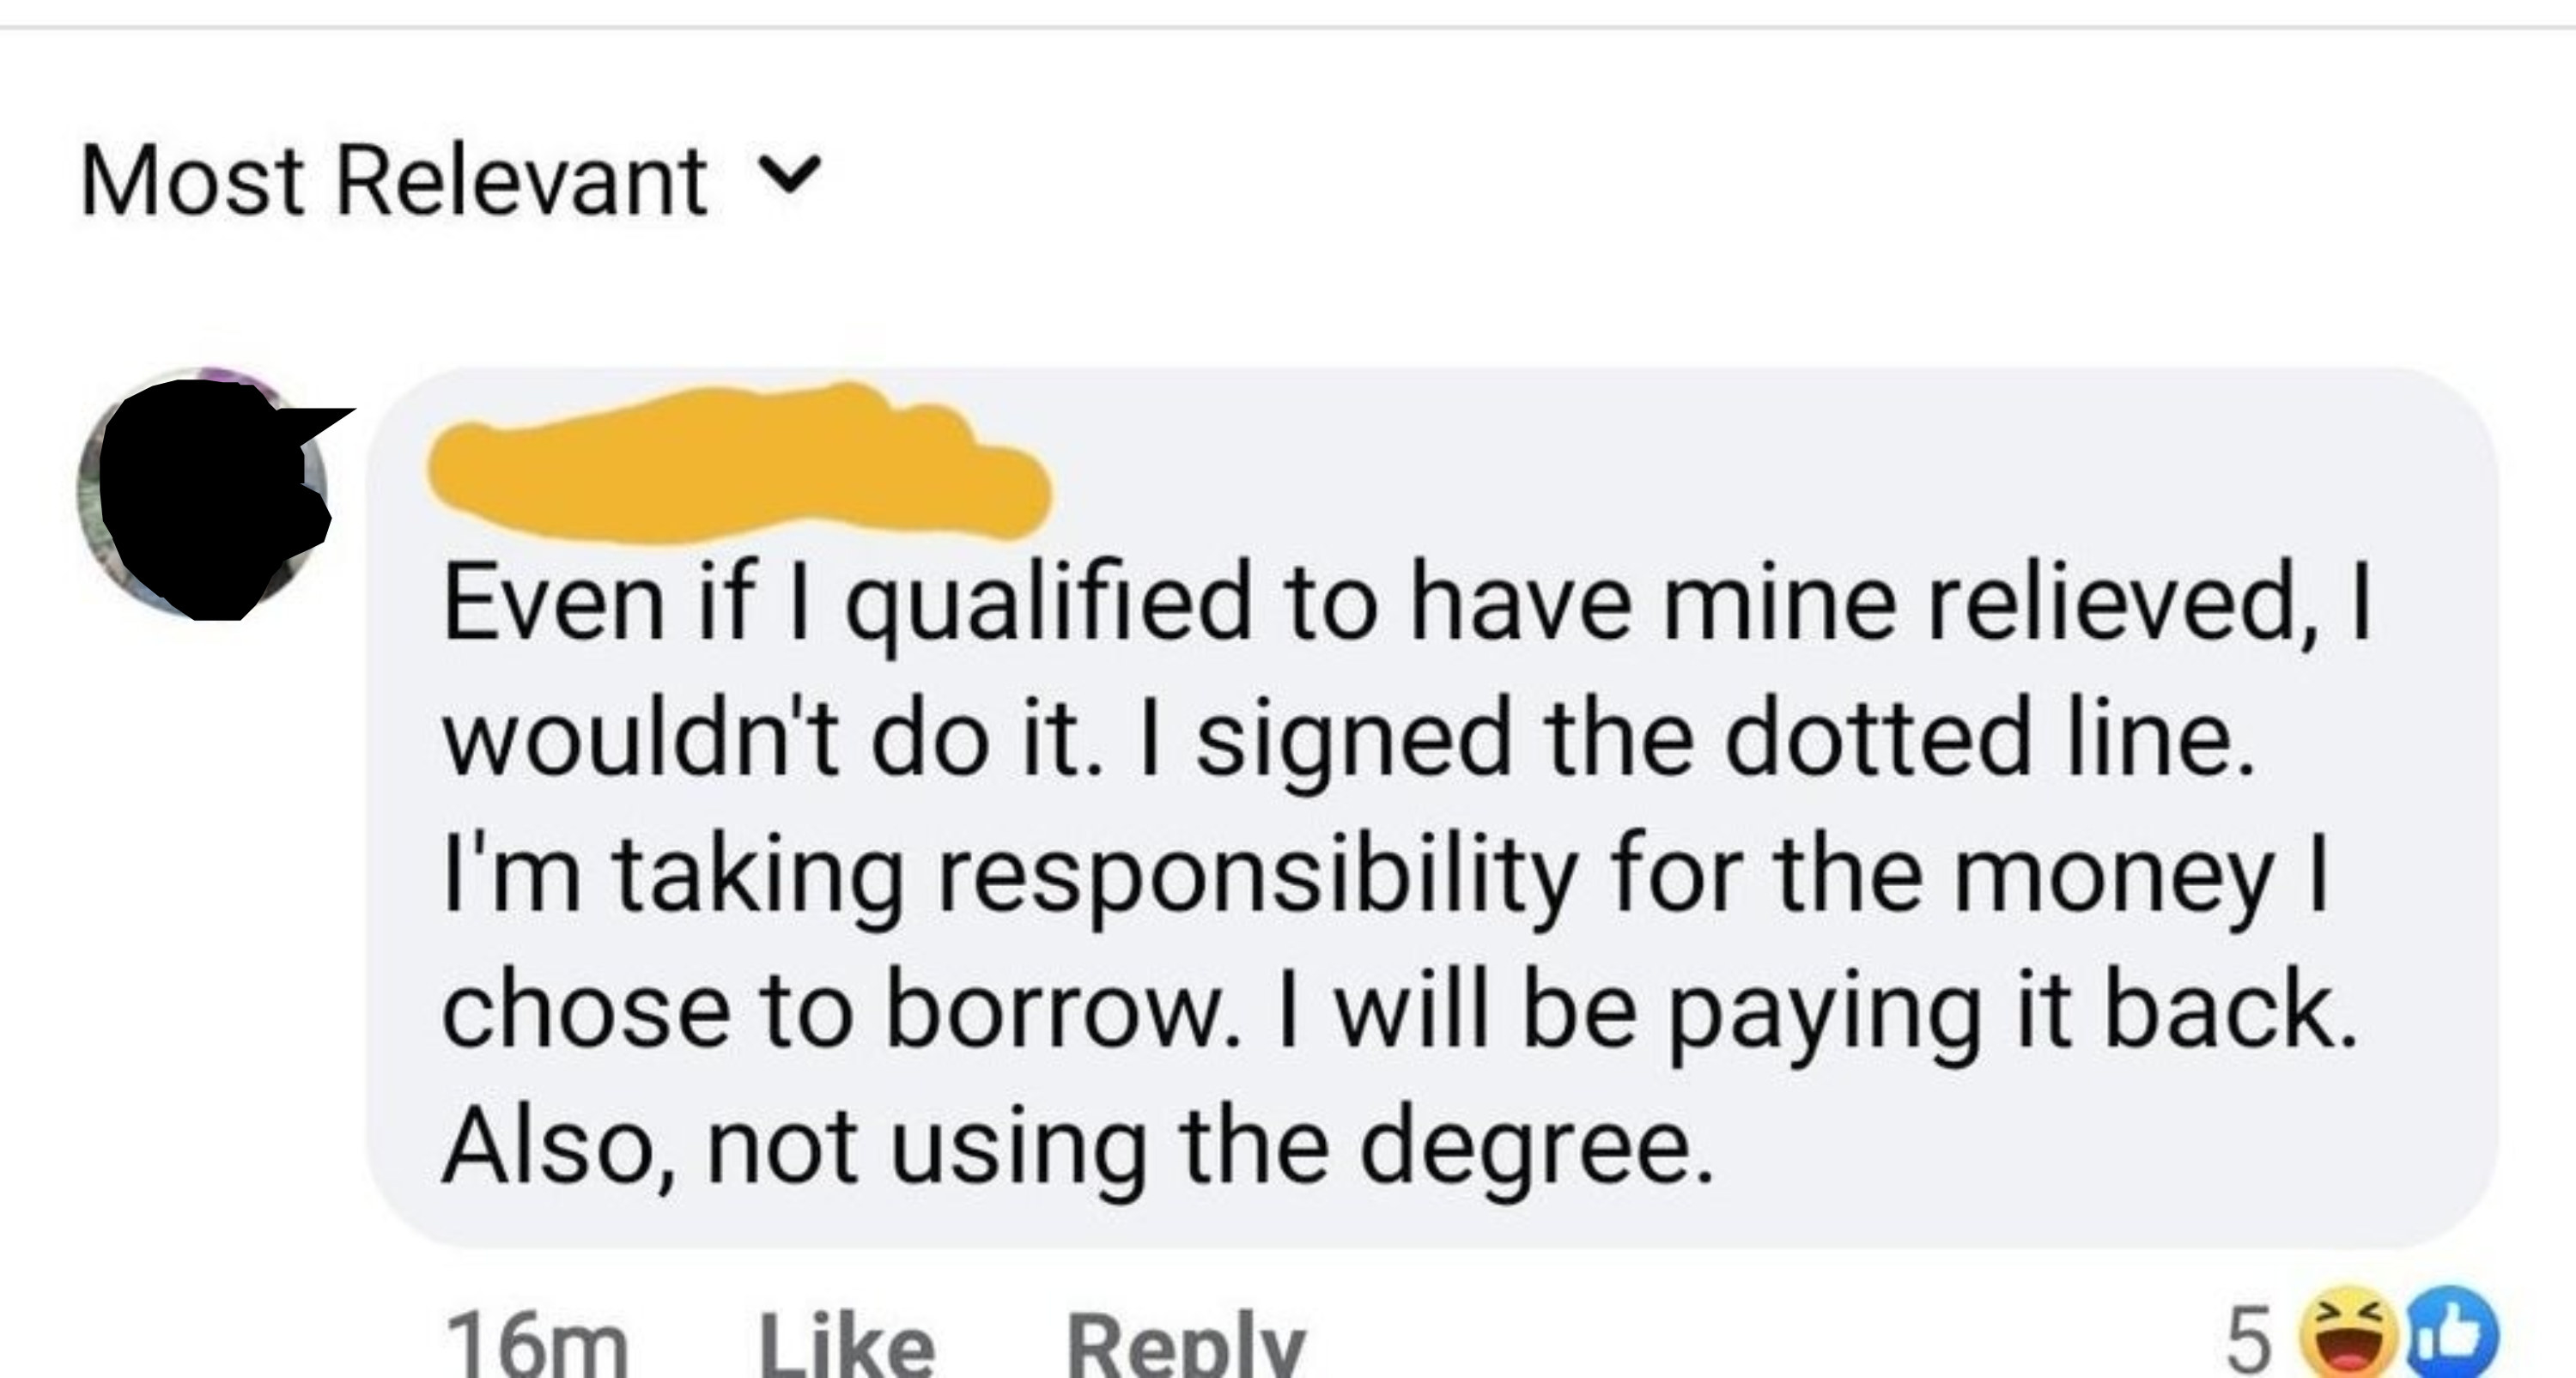 comment saying their not using their degree but they signed the dotted line so they&#x27;ll be paying the money back